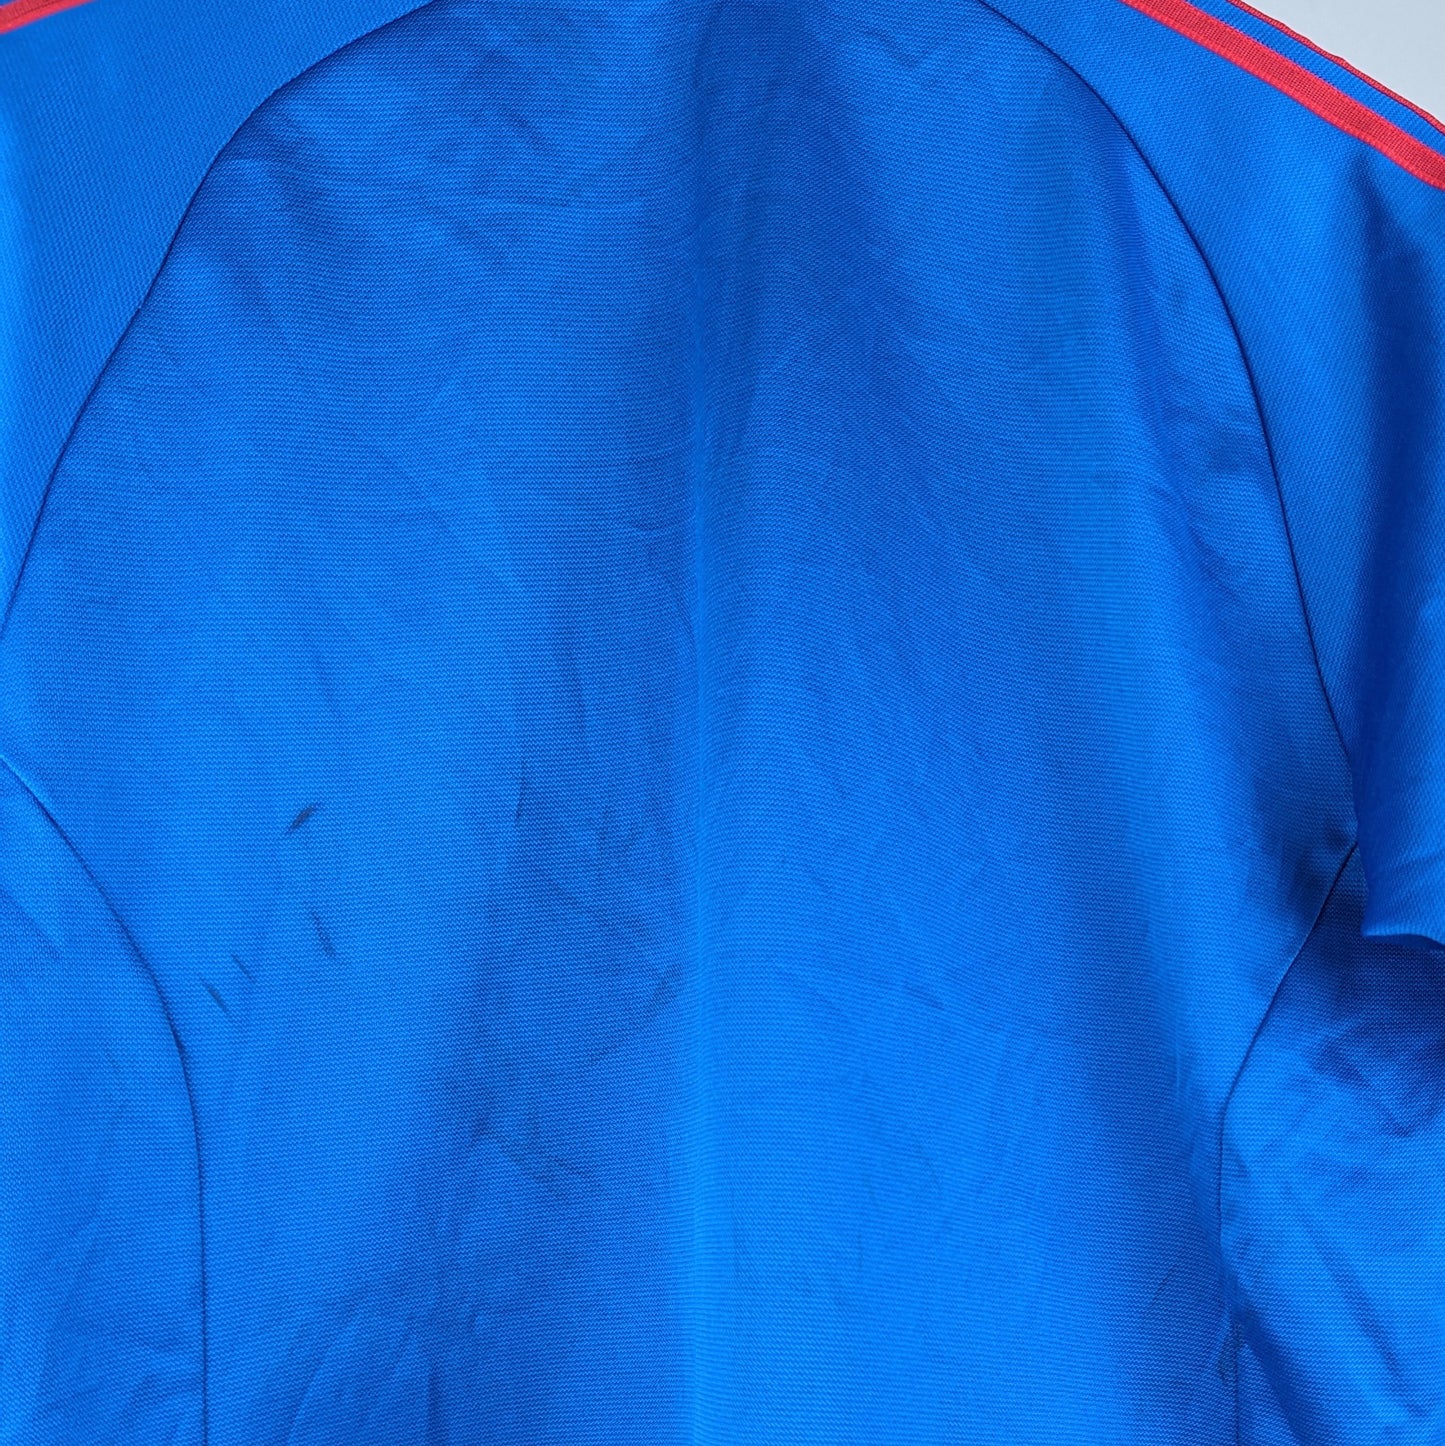 ADIDAS CLIMALITE TRACKJACKET BLUE AND RED (S)